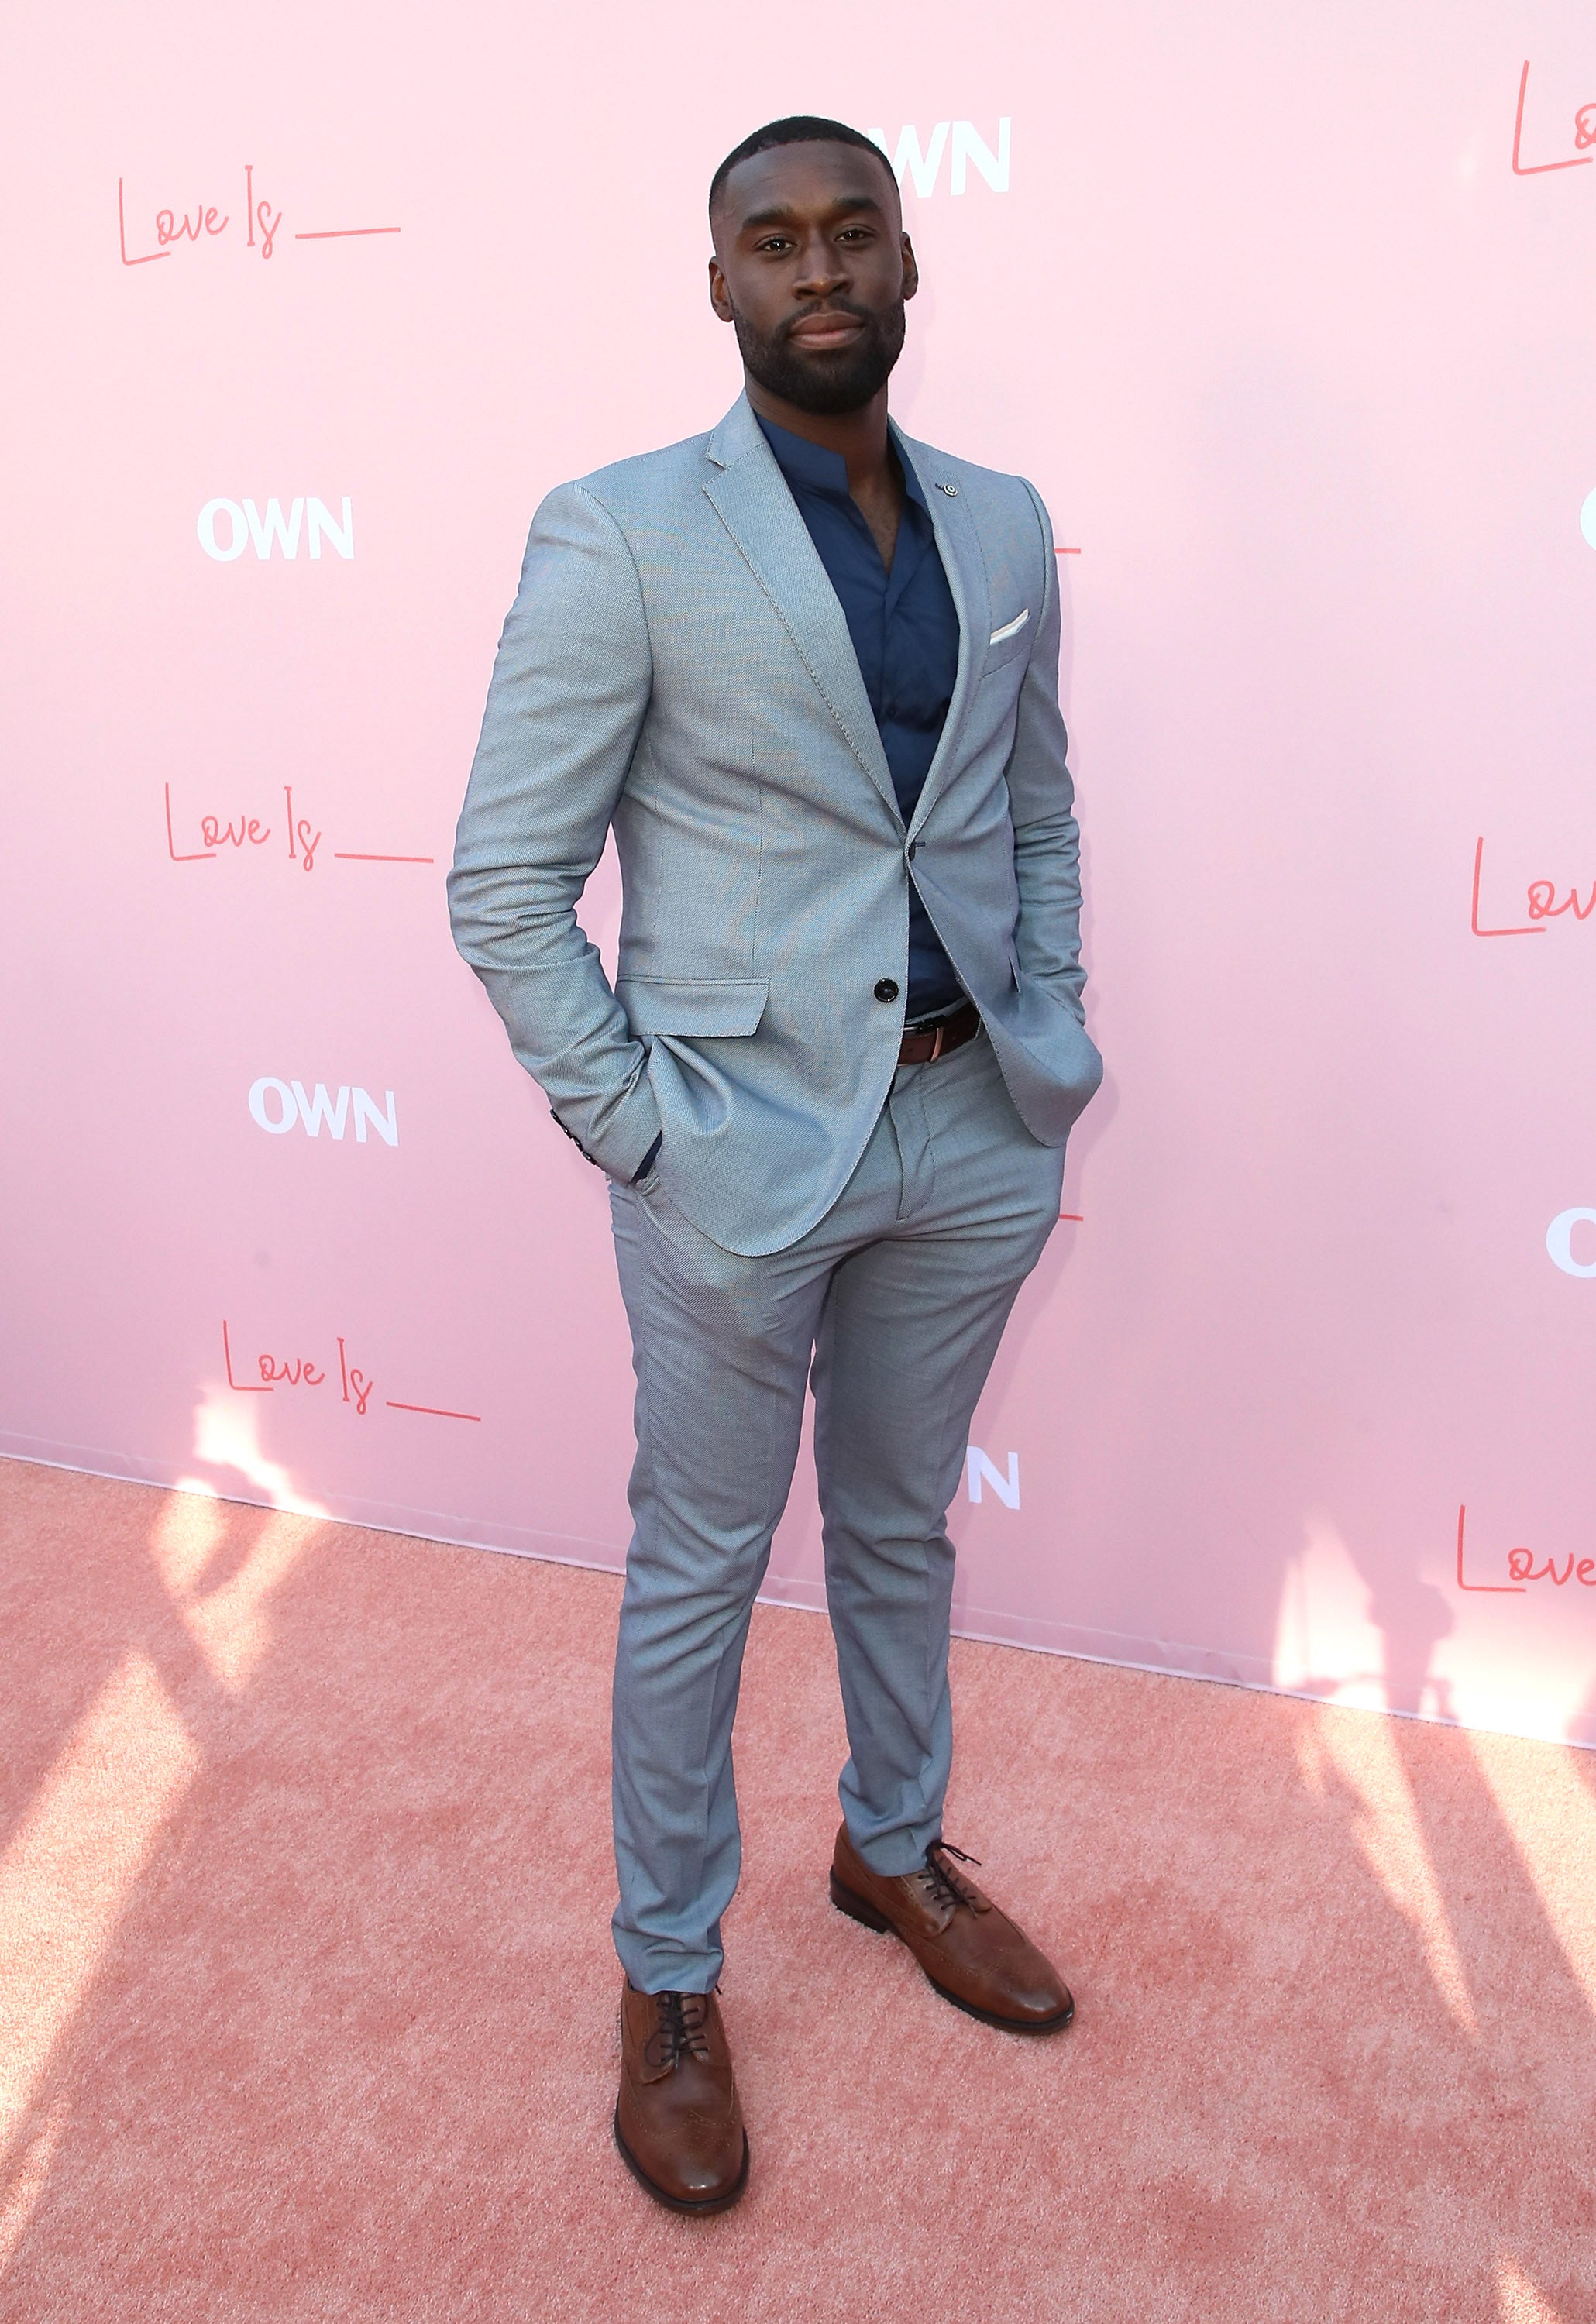 Celebs Come Out To Support Black Love And OWN's New Drama 'Love Is'
